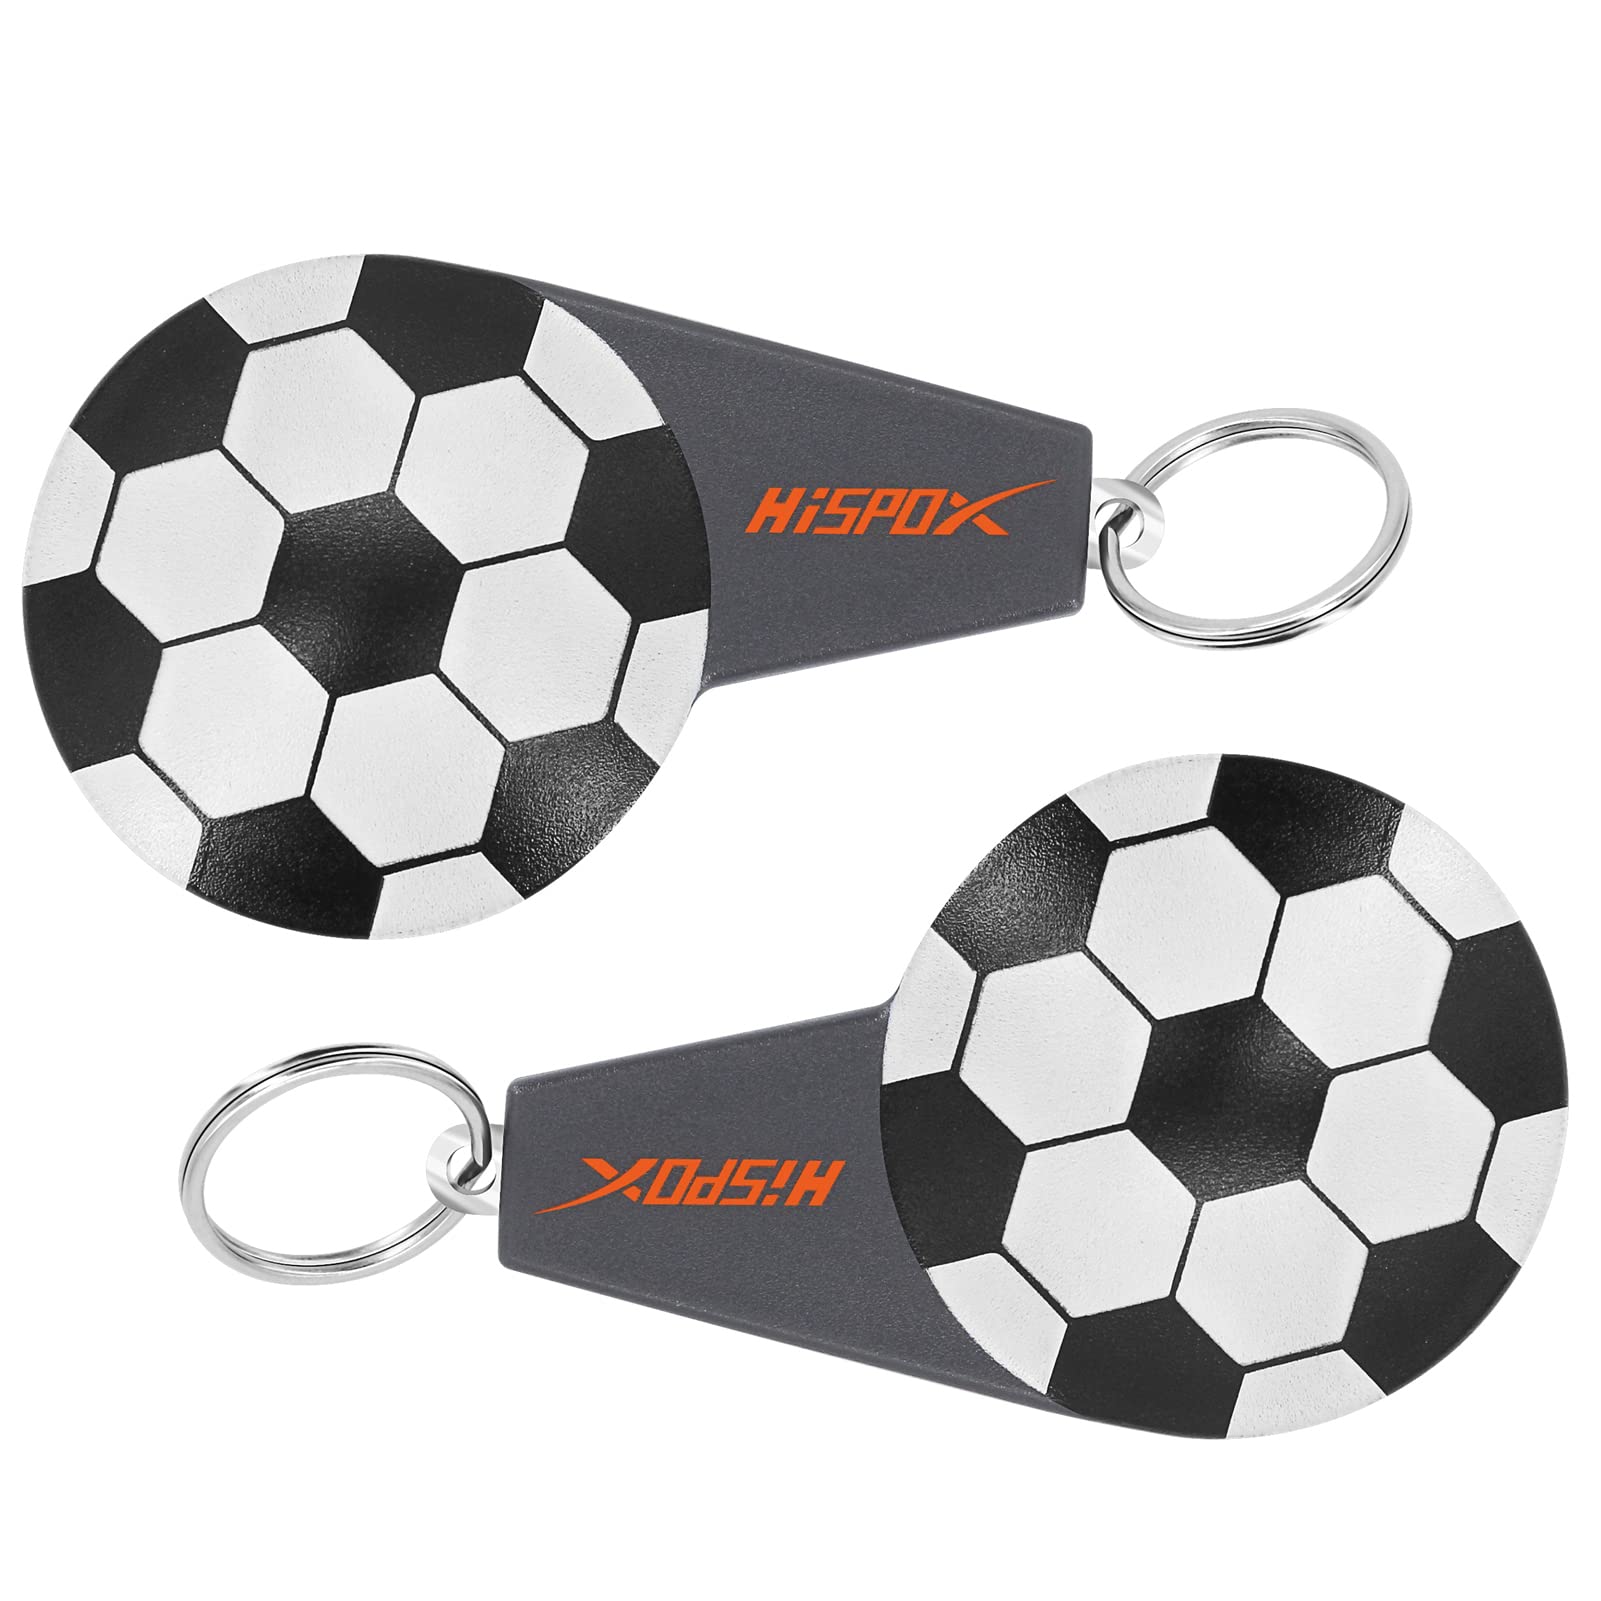 2 pcs Beer Bottle Opener with Keychain, Soccer Style Stainless Steel Flat Bottle Opener, Stick to Refrigerator for Easy Storage with Magnet, Gift for Men Husband Father